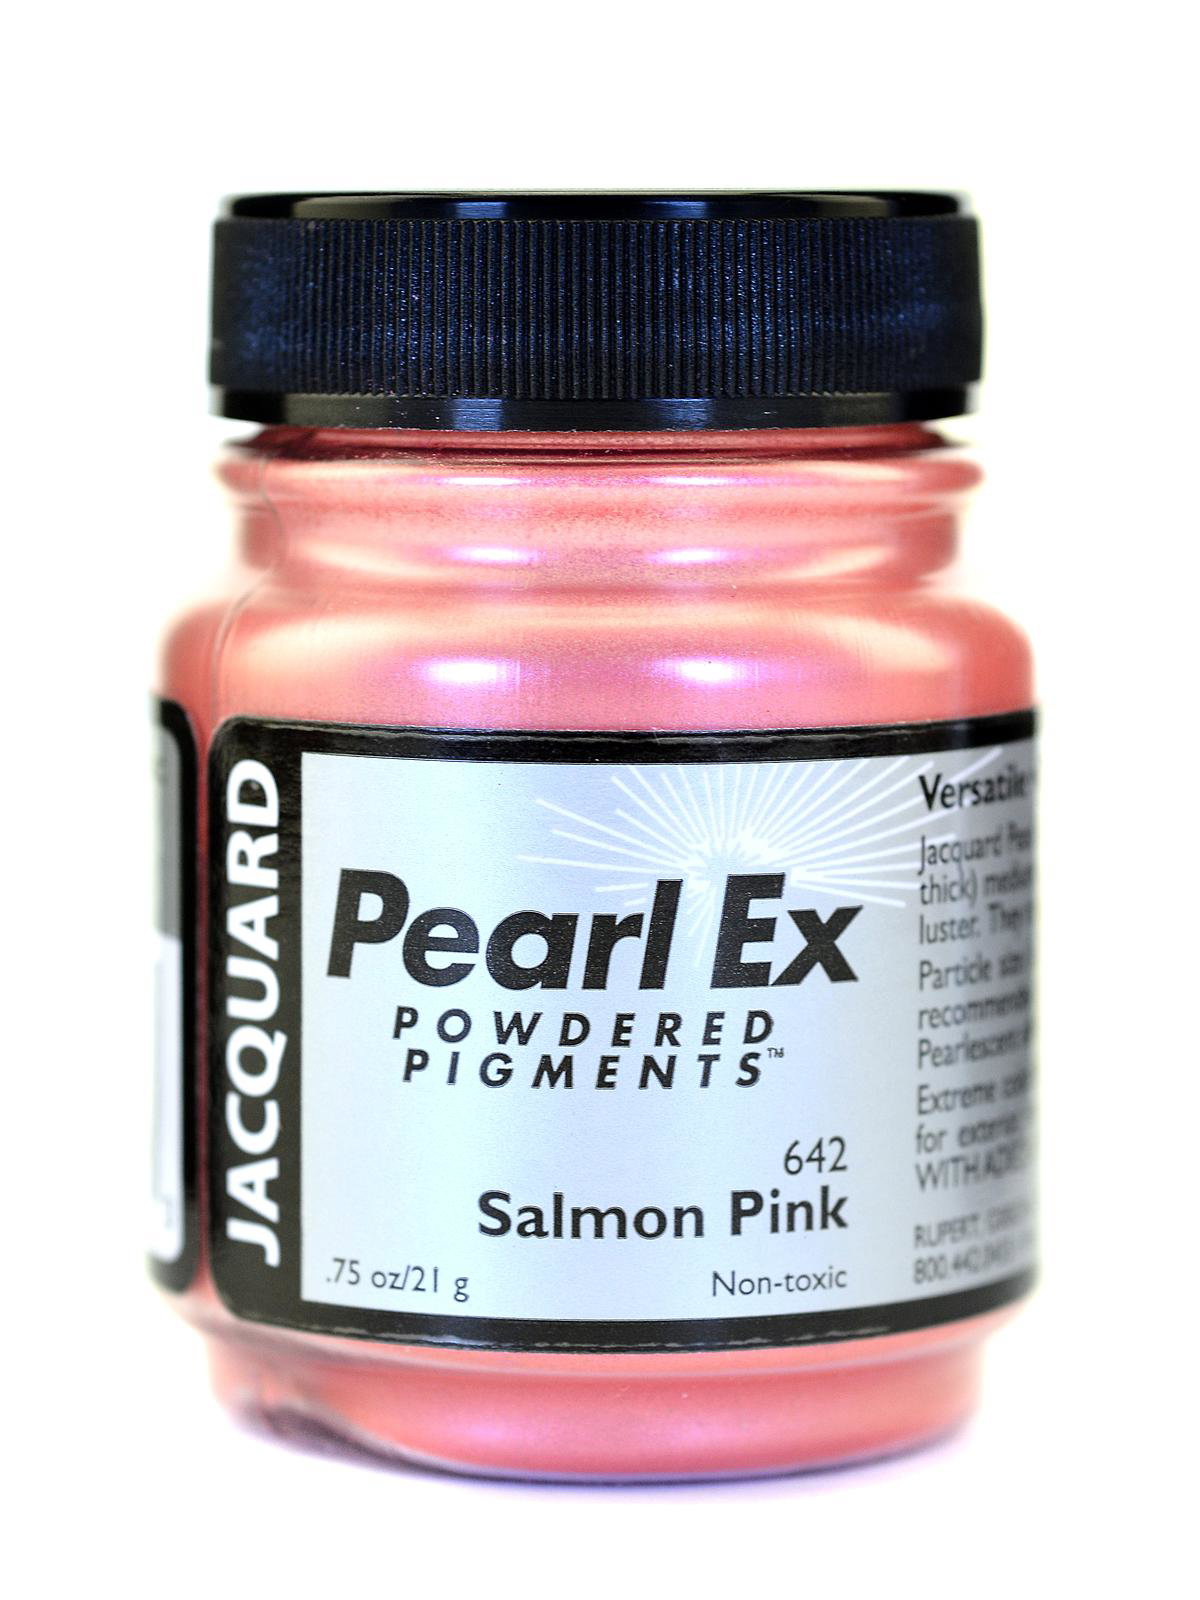 Jacquard Pearl Ex Powdered Pigments 6 Color Set - Versatile - Non-Toxic -  Metallic Pearlescent Colors for Resin Art Crafts and More